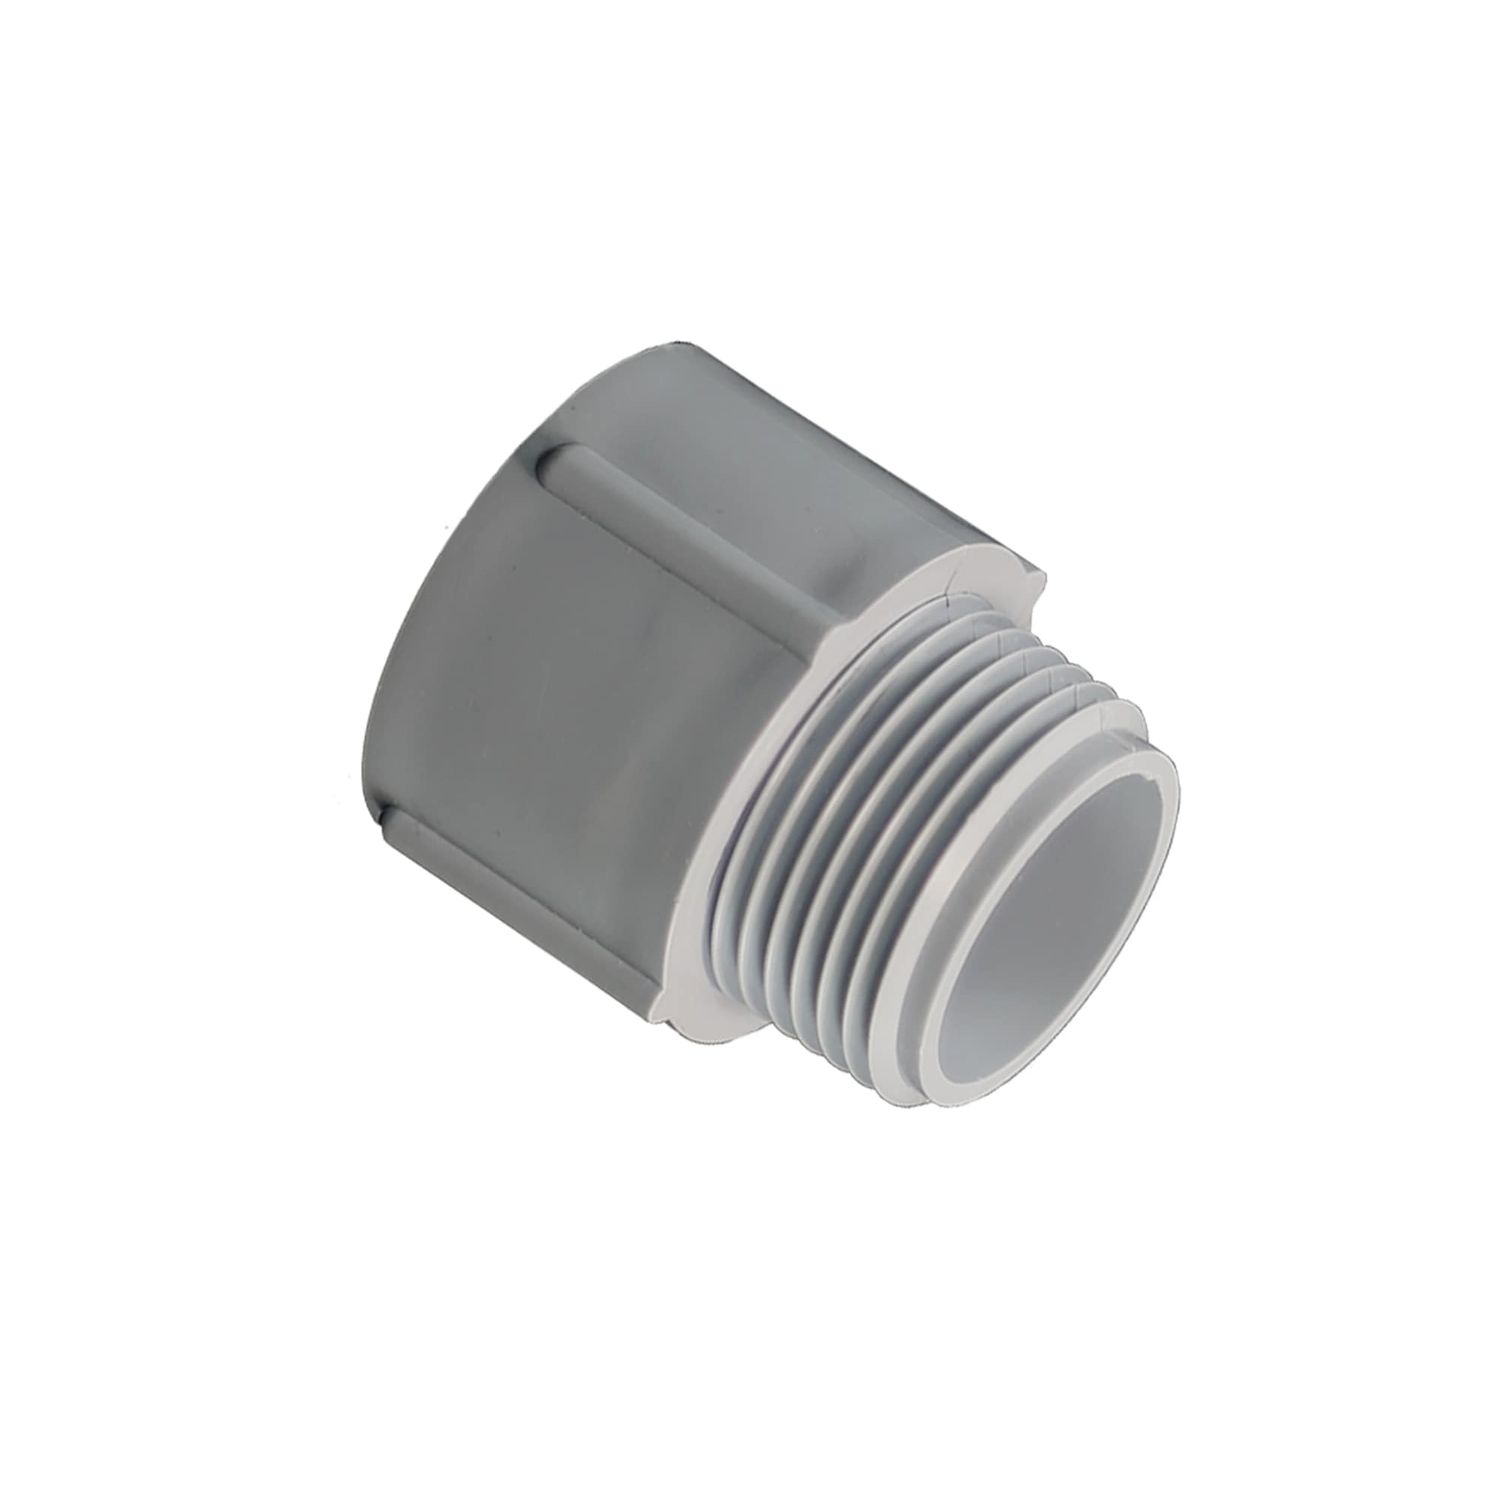 Cantex 1/2 in. Dia. PVC Male Adapter